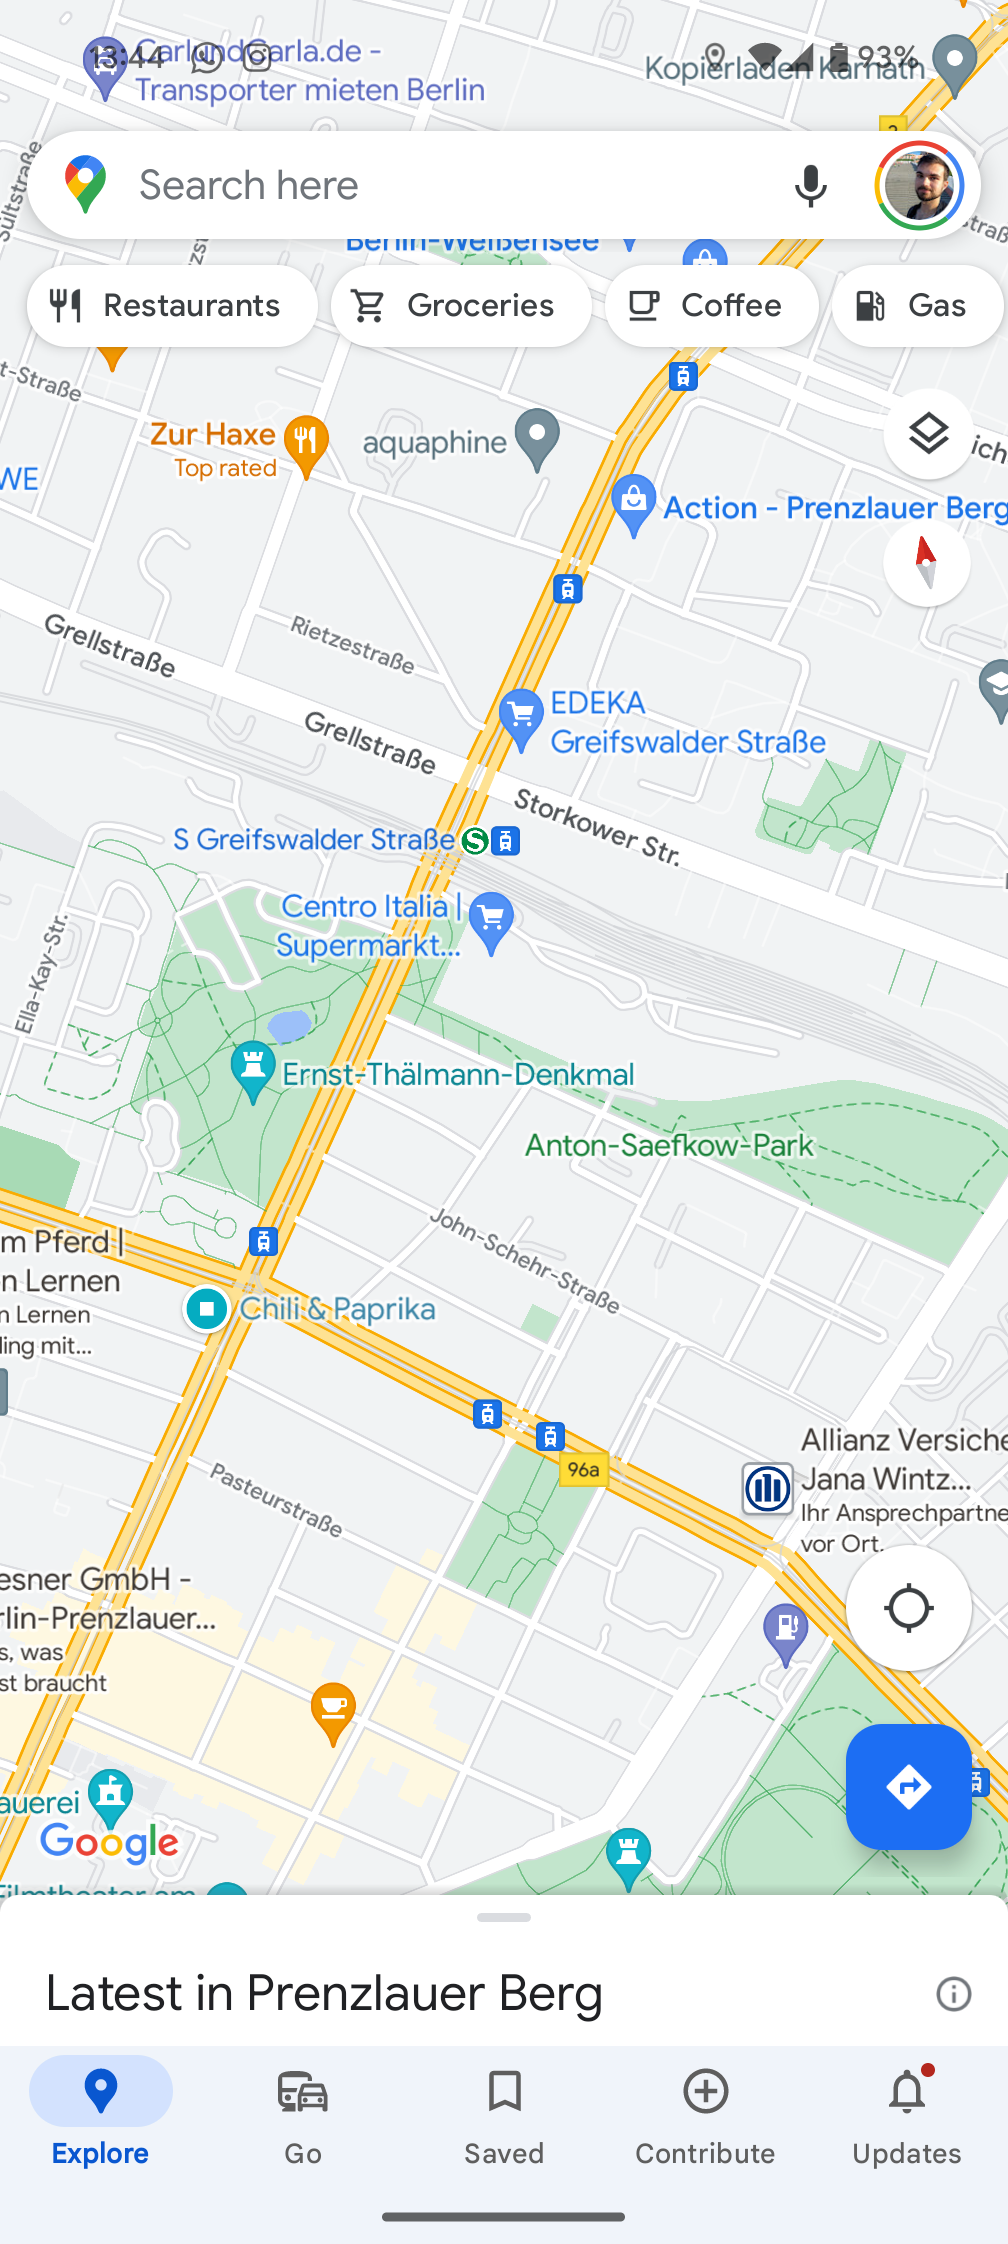 Google Maps showing traffic hazards in a selected area